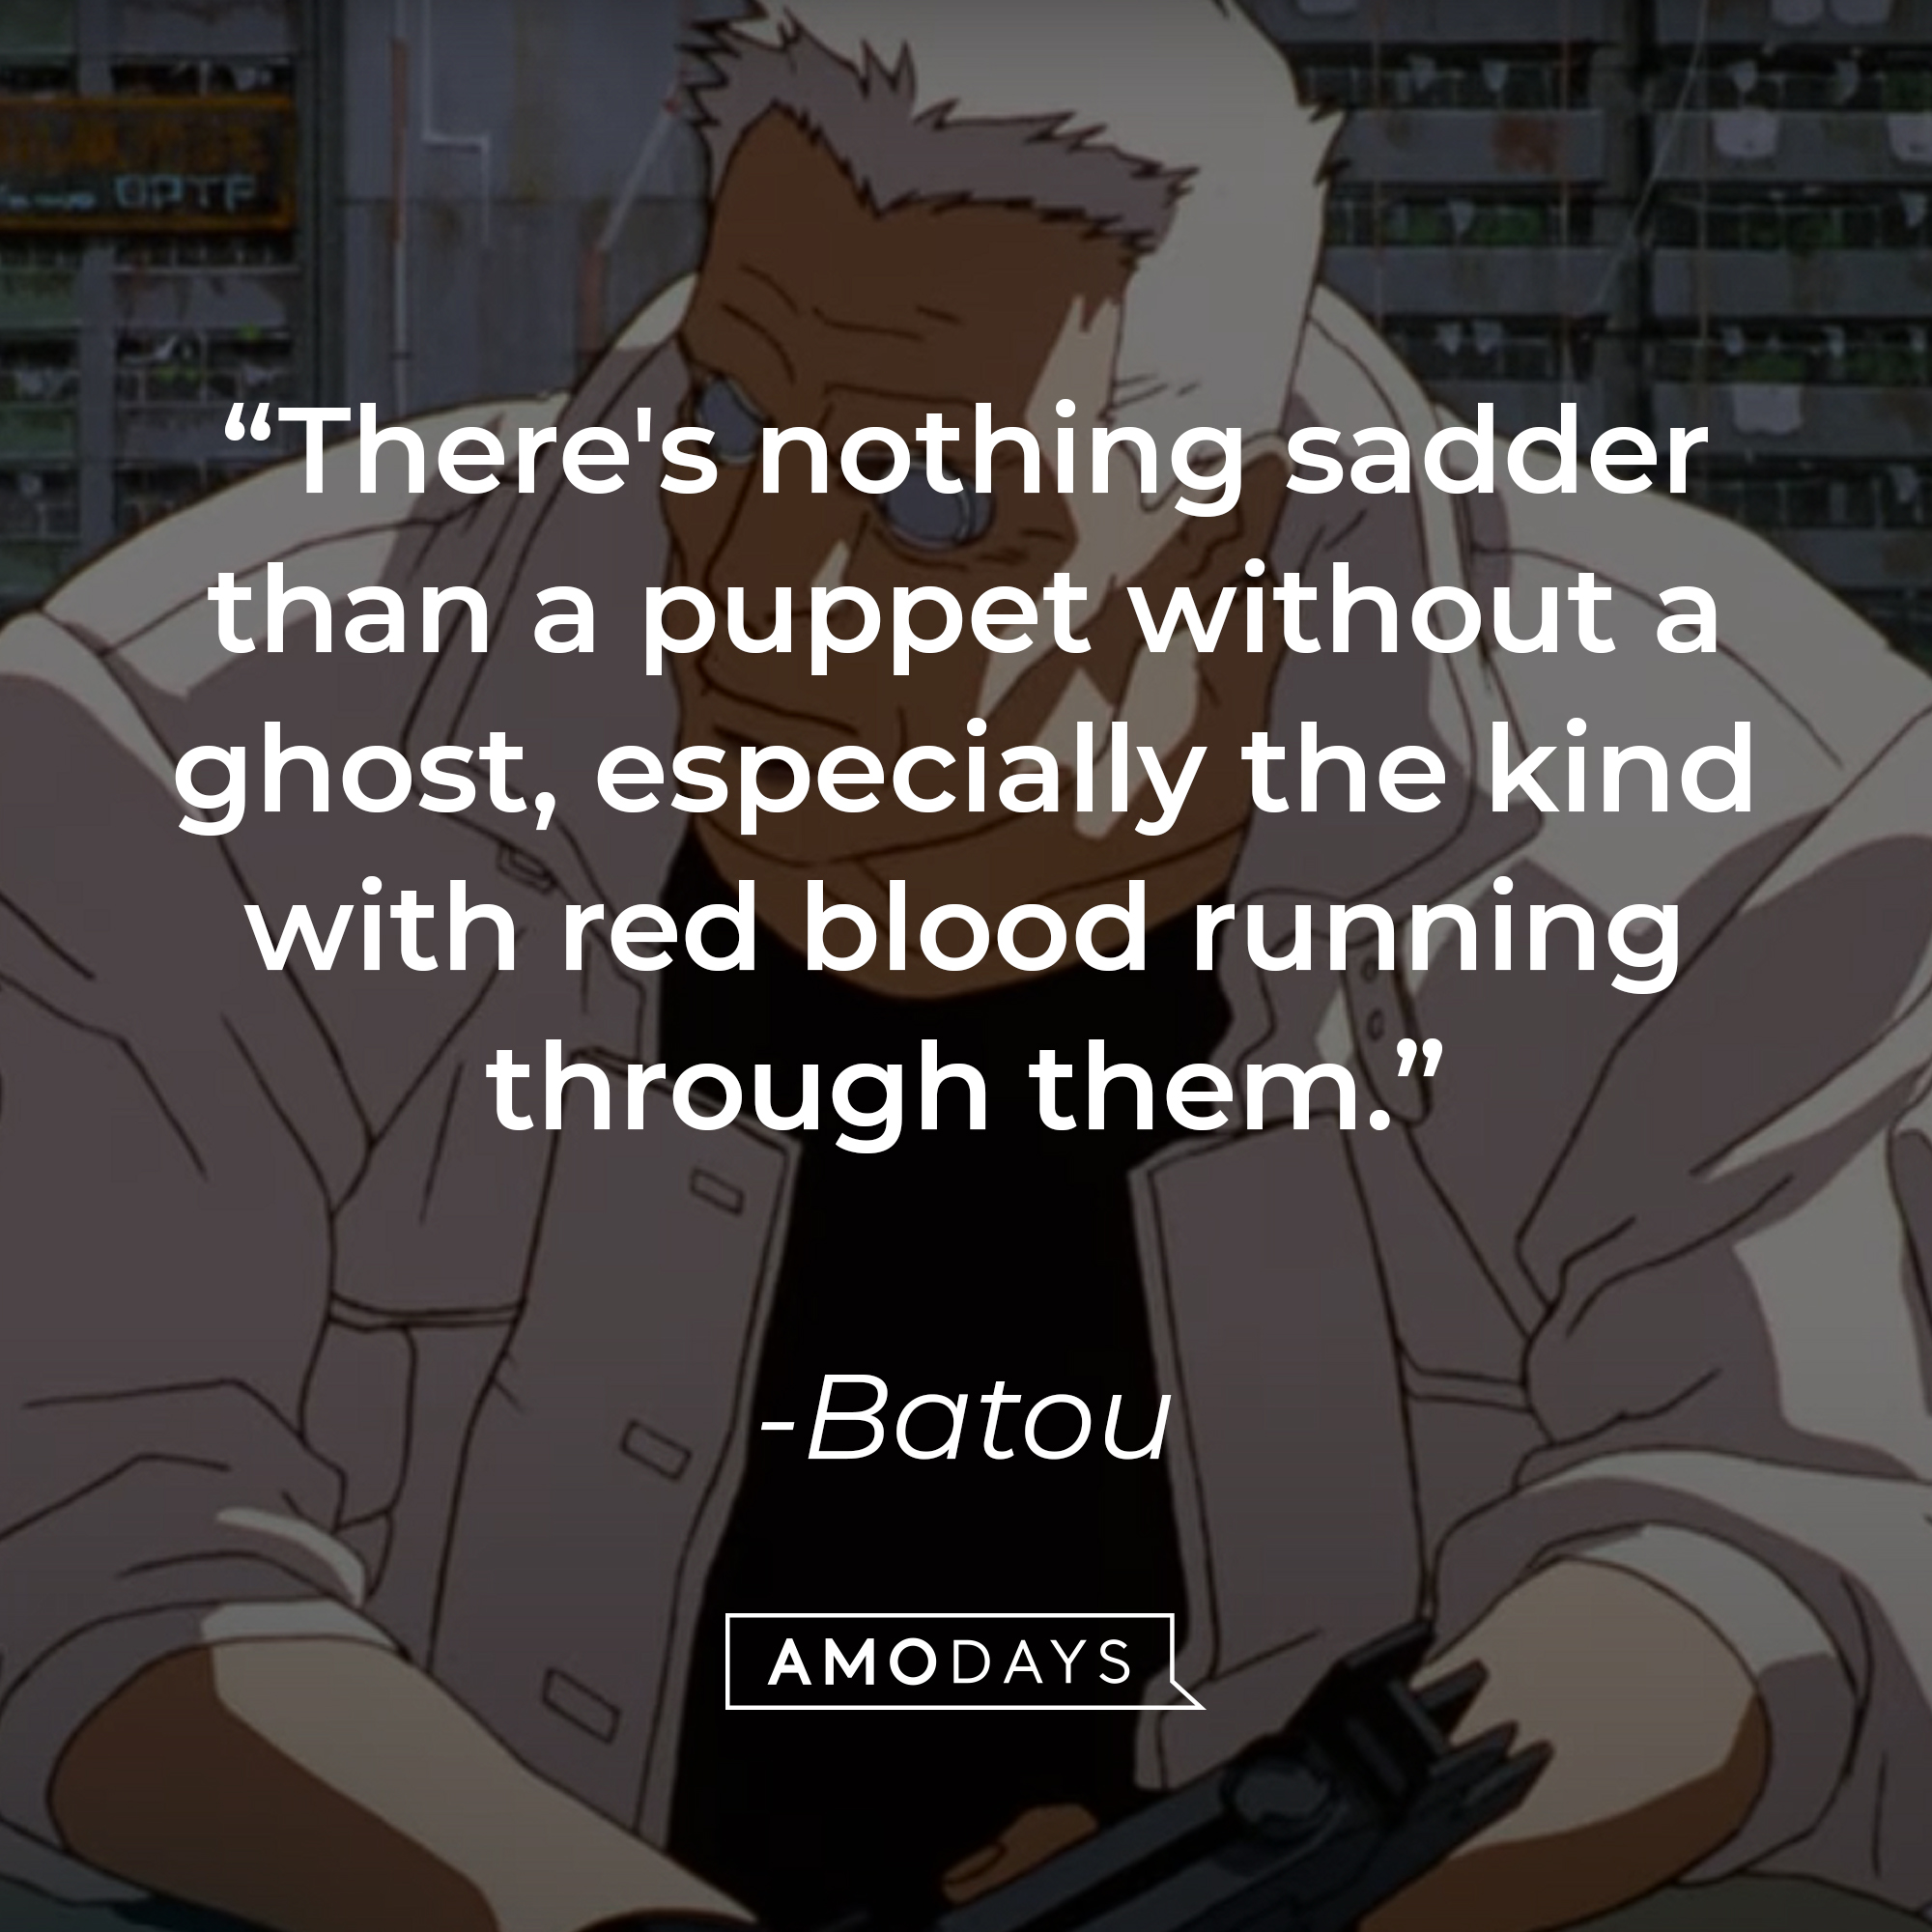 Batou with his quote: "There's nothing sadder than a puppet without a ghost, especially the kind with red blood running through them." | Source: YouTube.com/LionsgateMovies